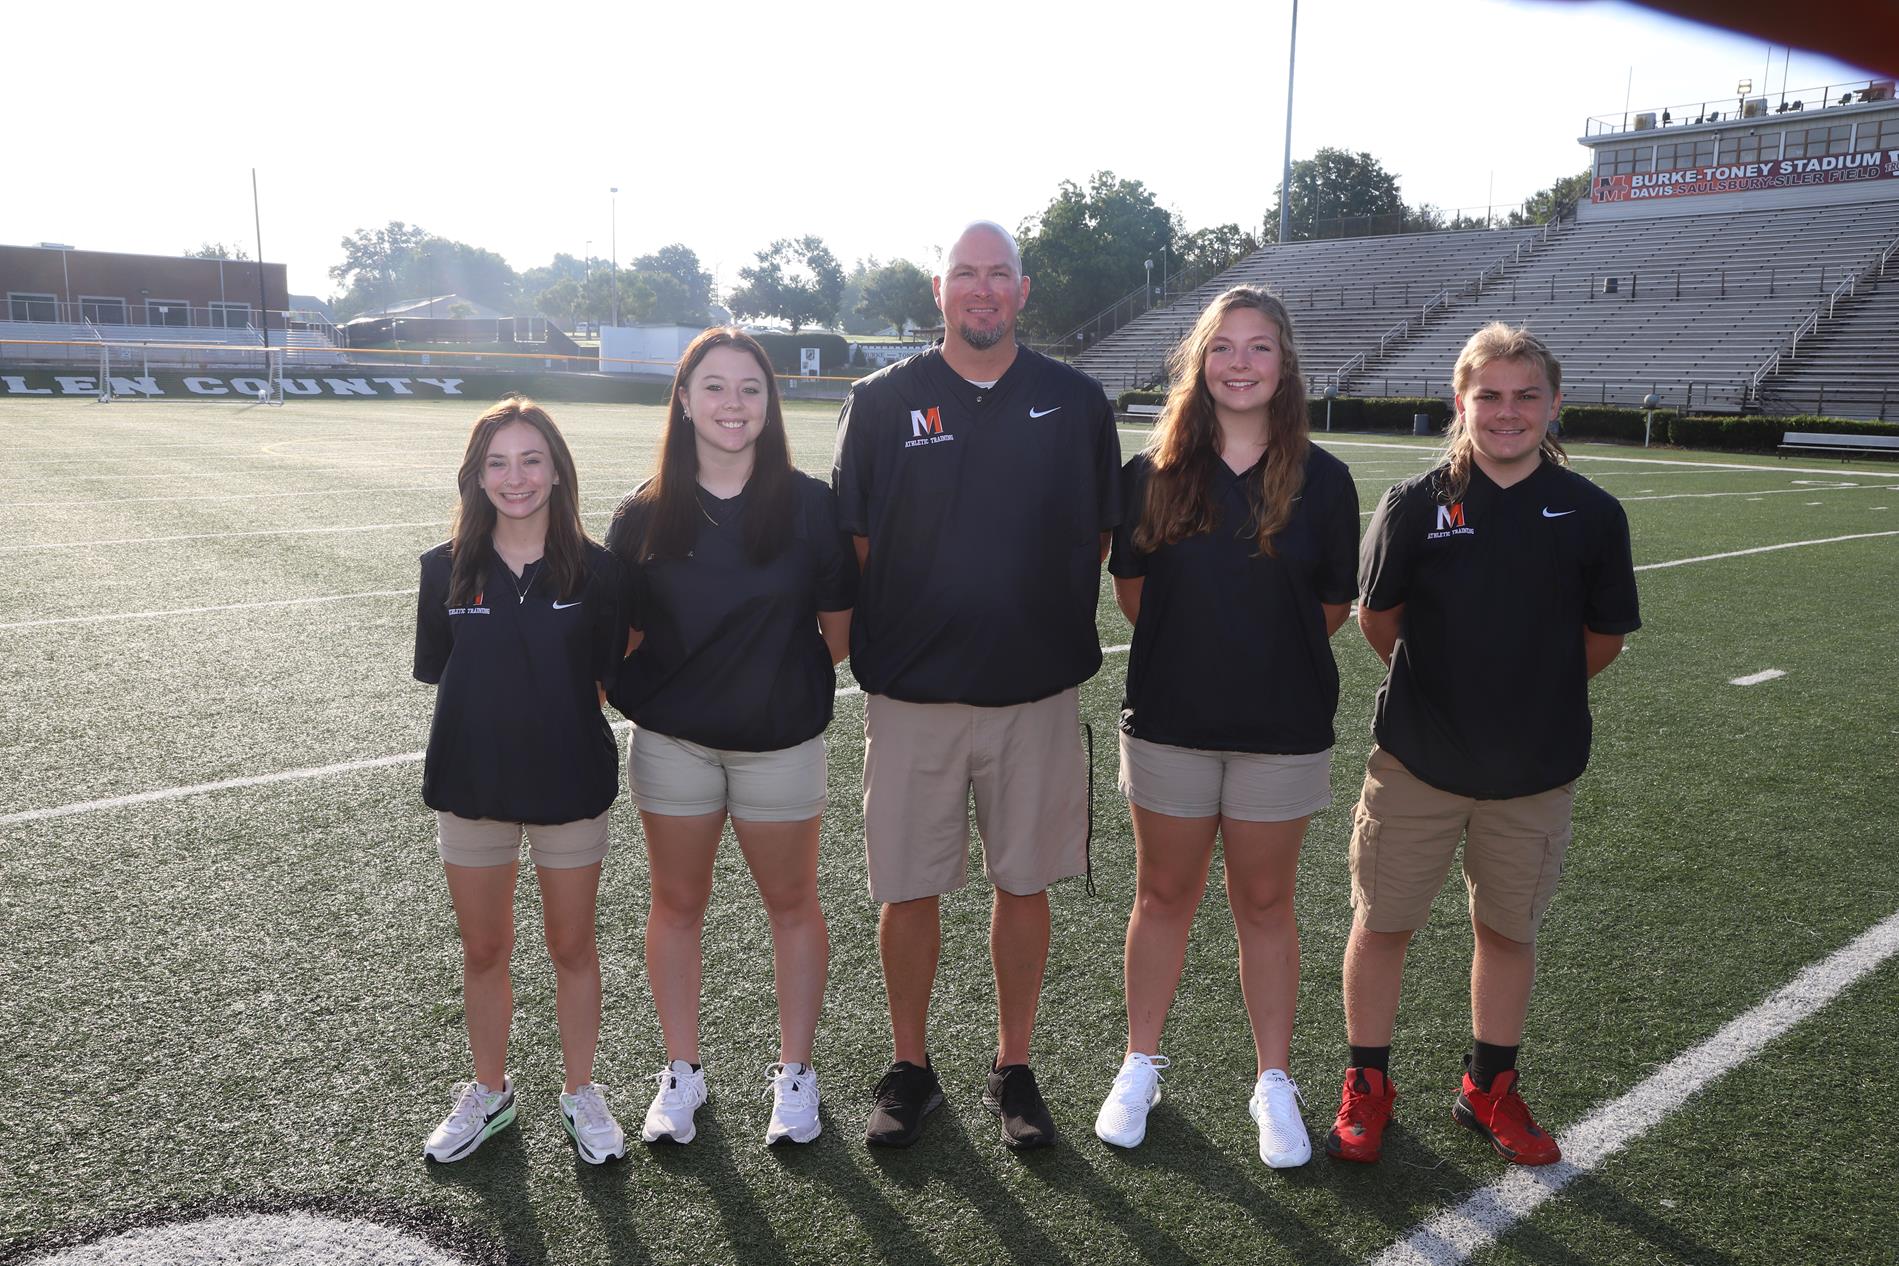 Athletic Trainers